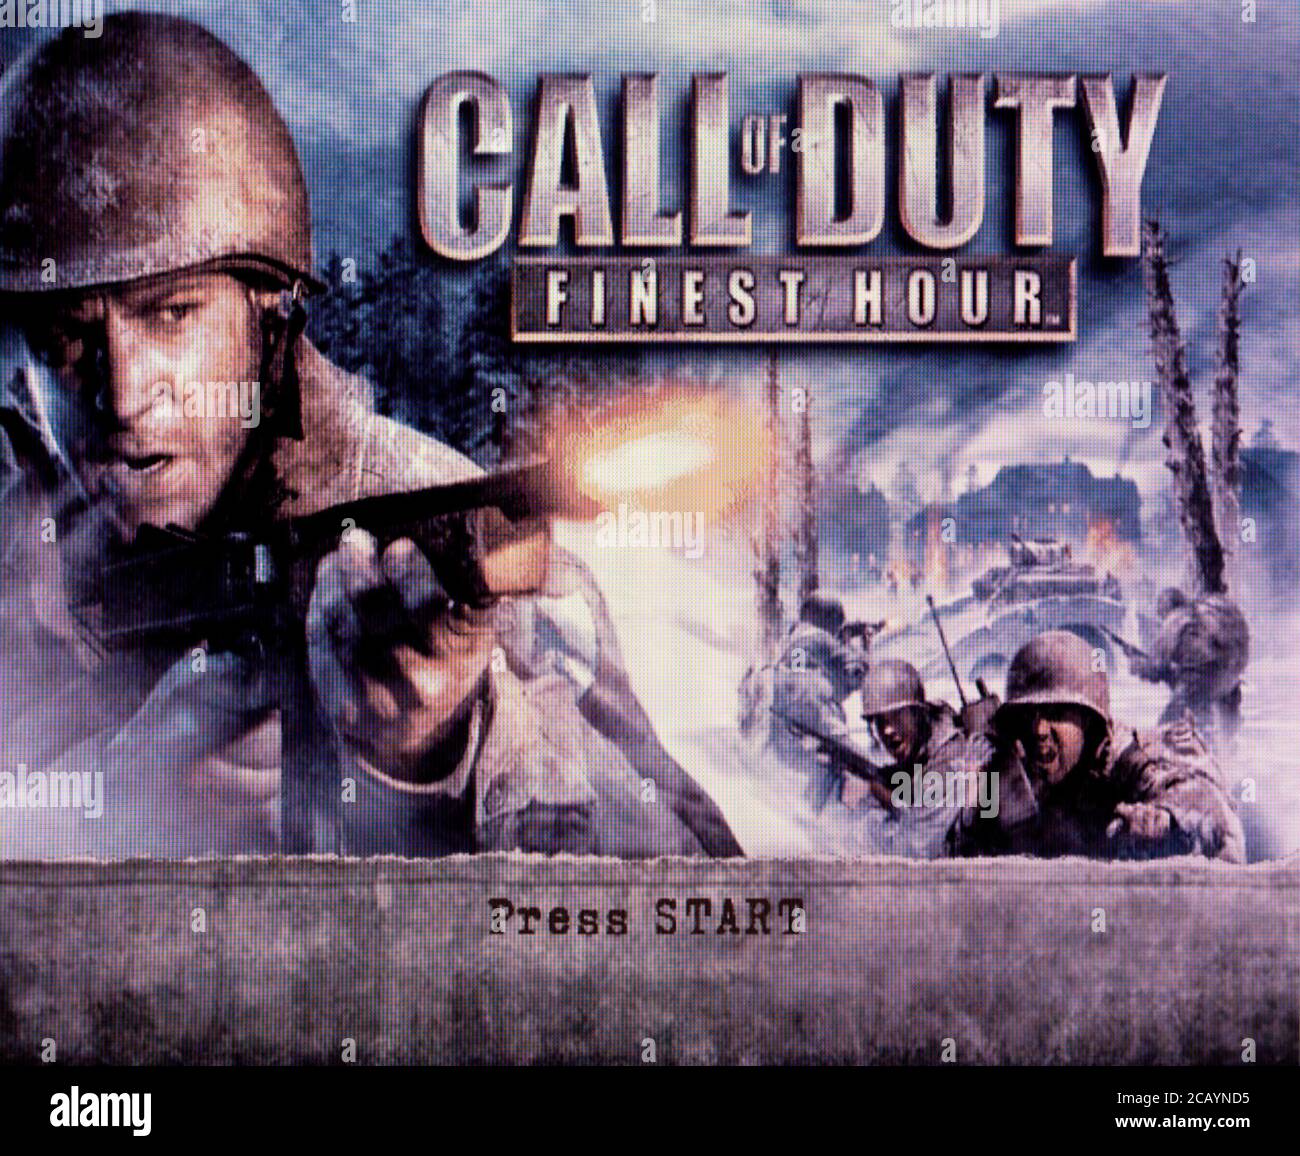 Call of Duty Finest Hour - Nintendo Gamecube Videogame - Editorial use only Stock Photo